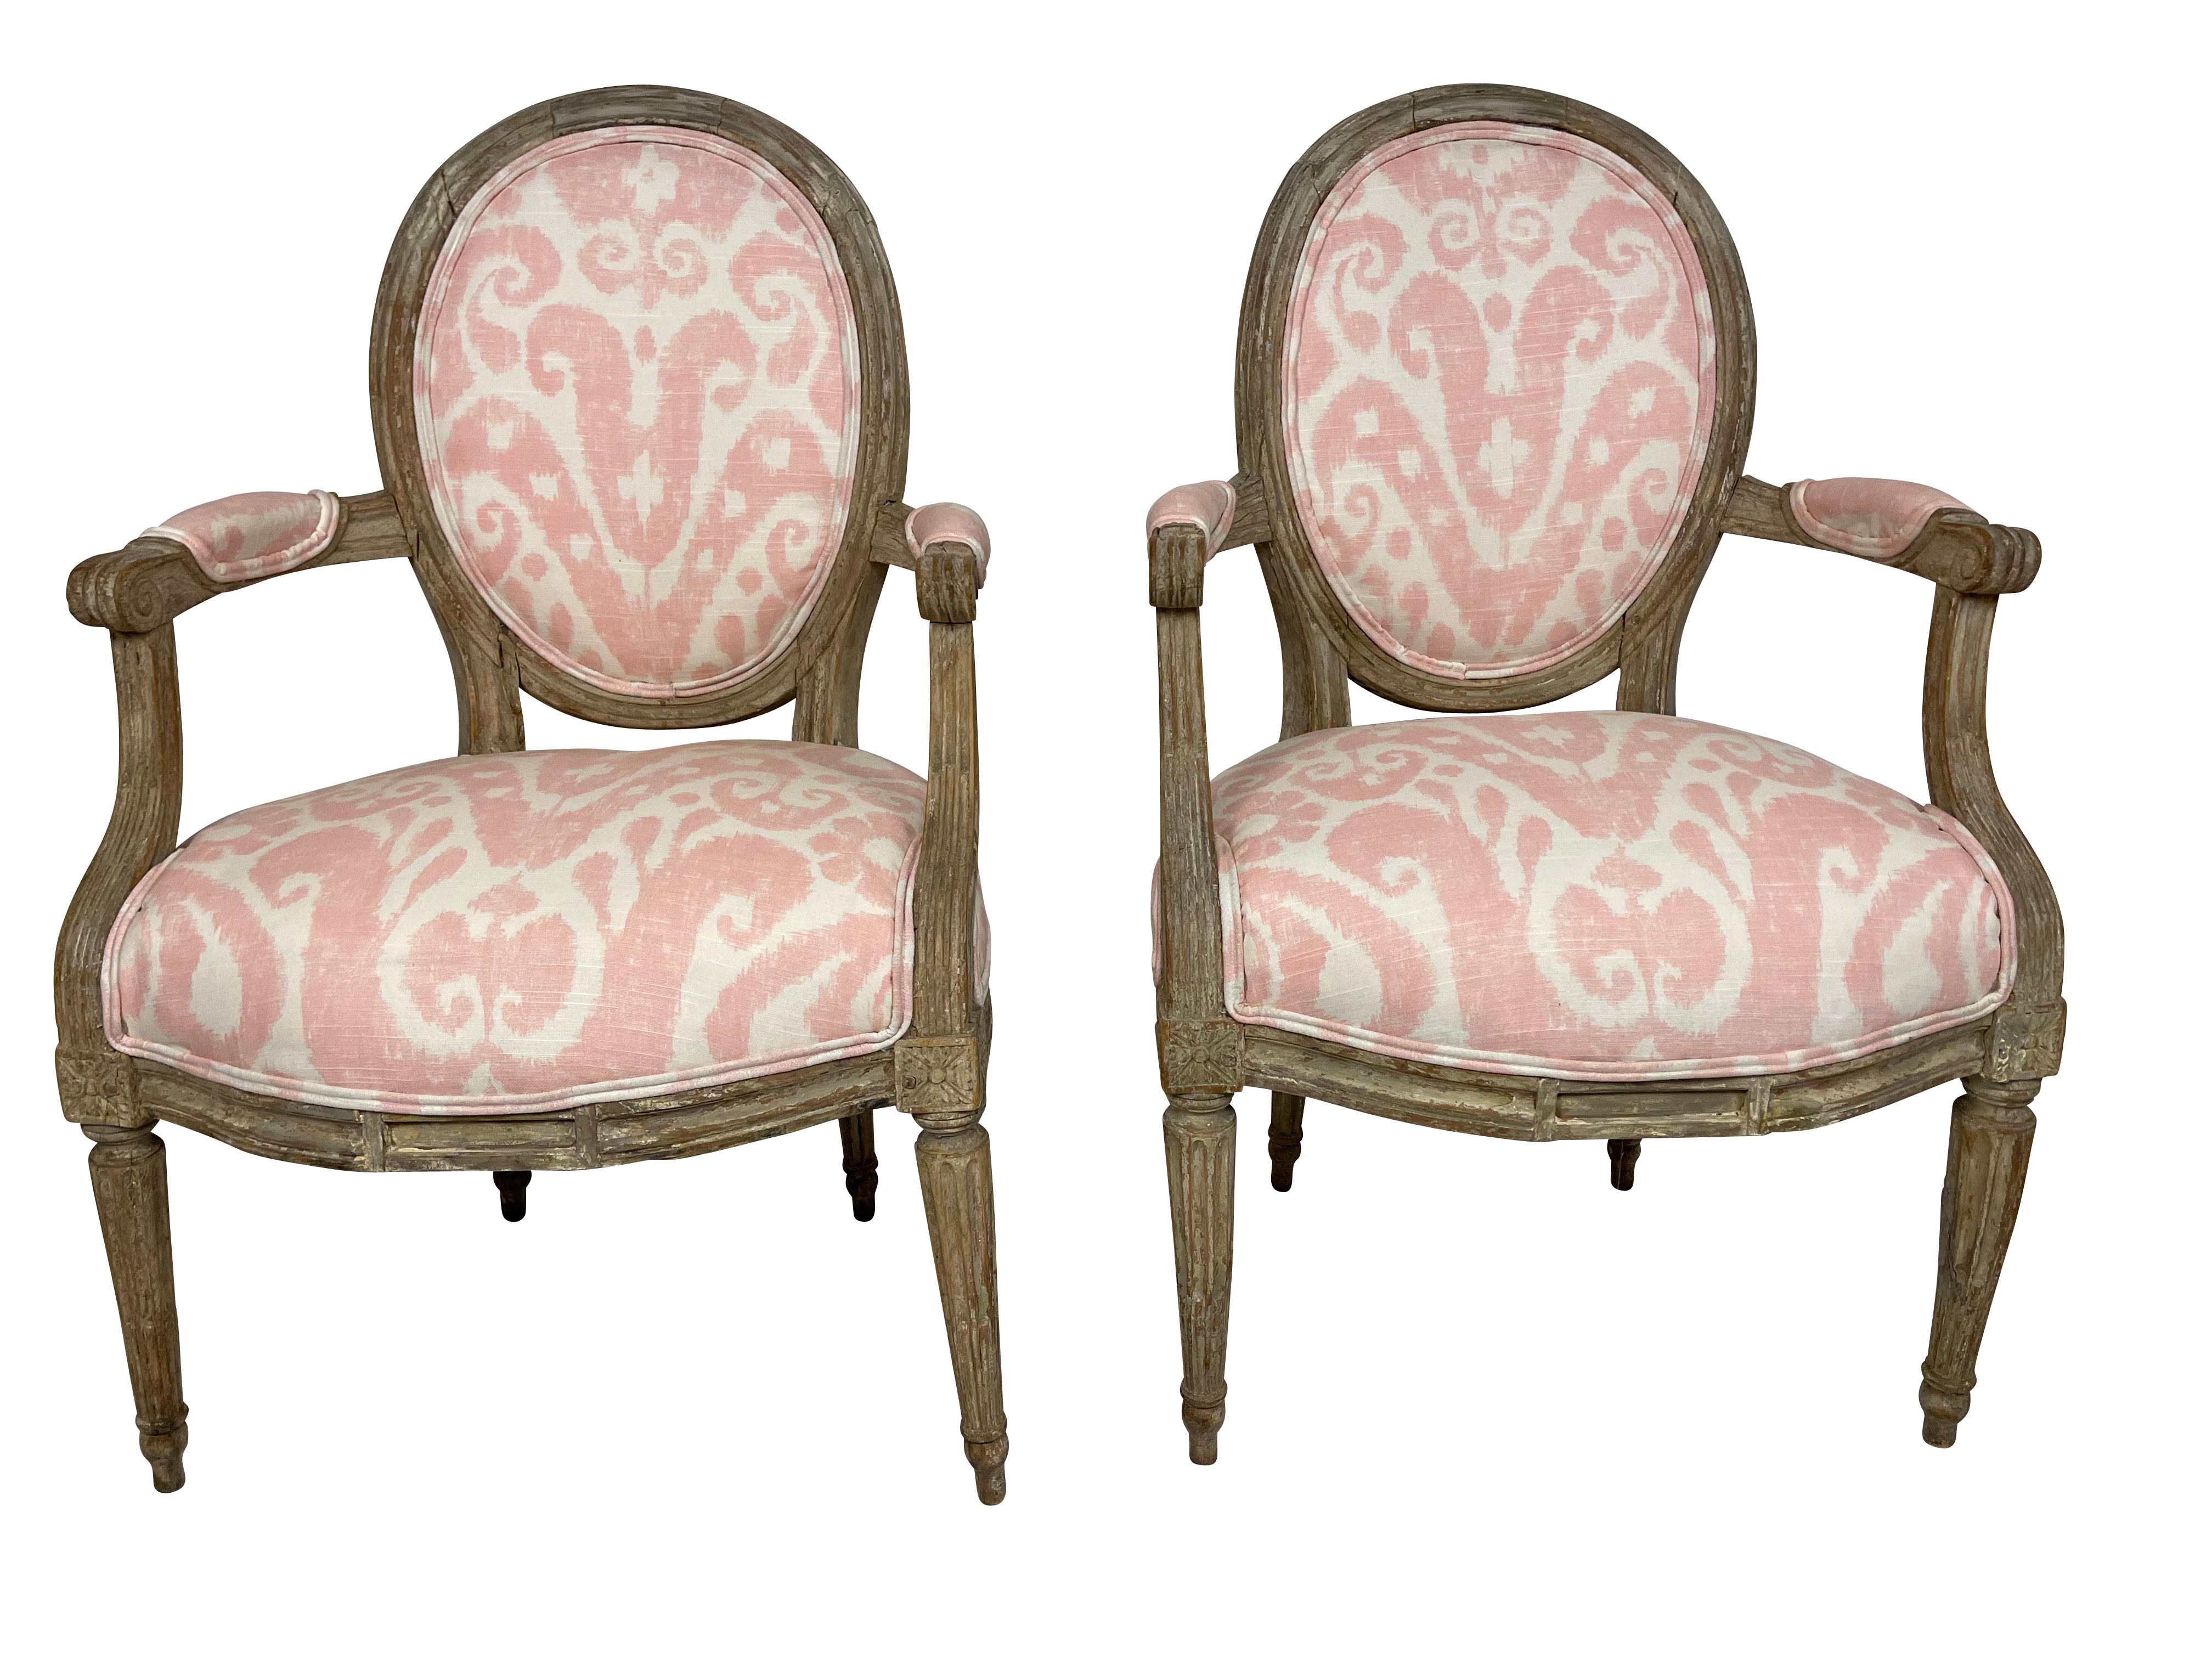 Pair of Grey painted and carved Louis XVI style small armchairs. Perfect for a little girls' room or bedroom. Newly professionally upholstered in pink Ikat fabric.